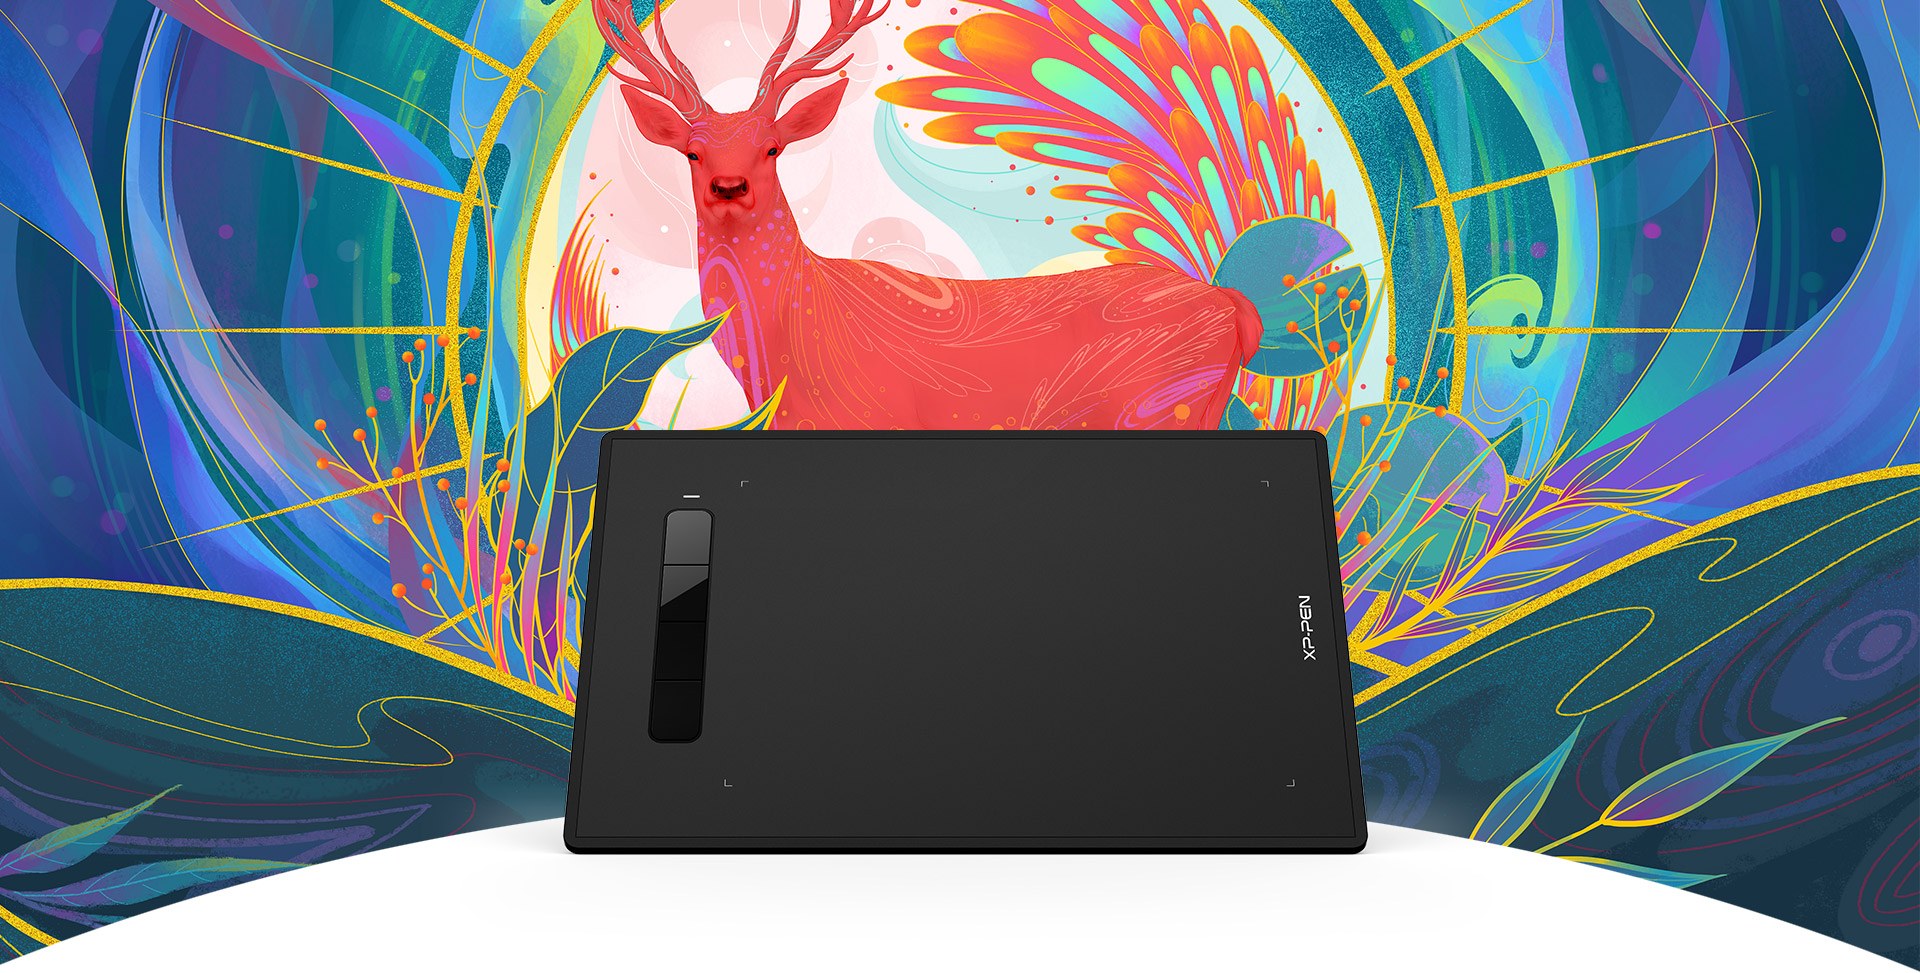 Stay creative at a new level with XP-Pen Star G960S &Star G960S Plus drawing pad